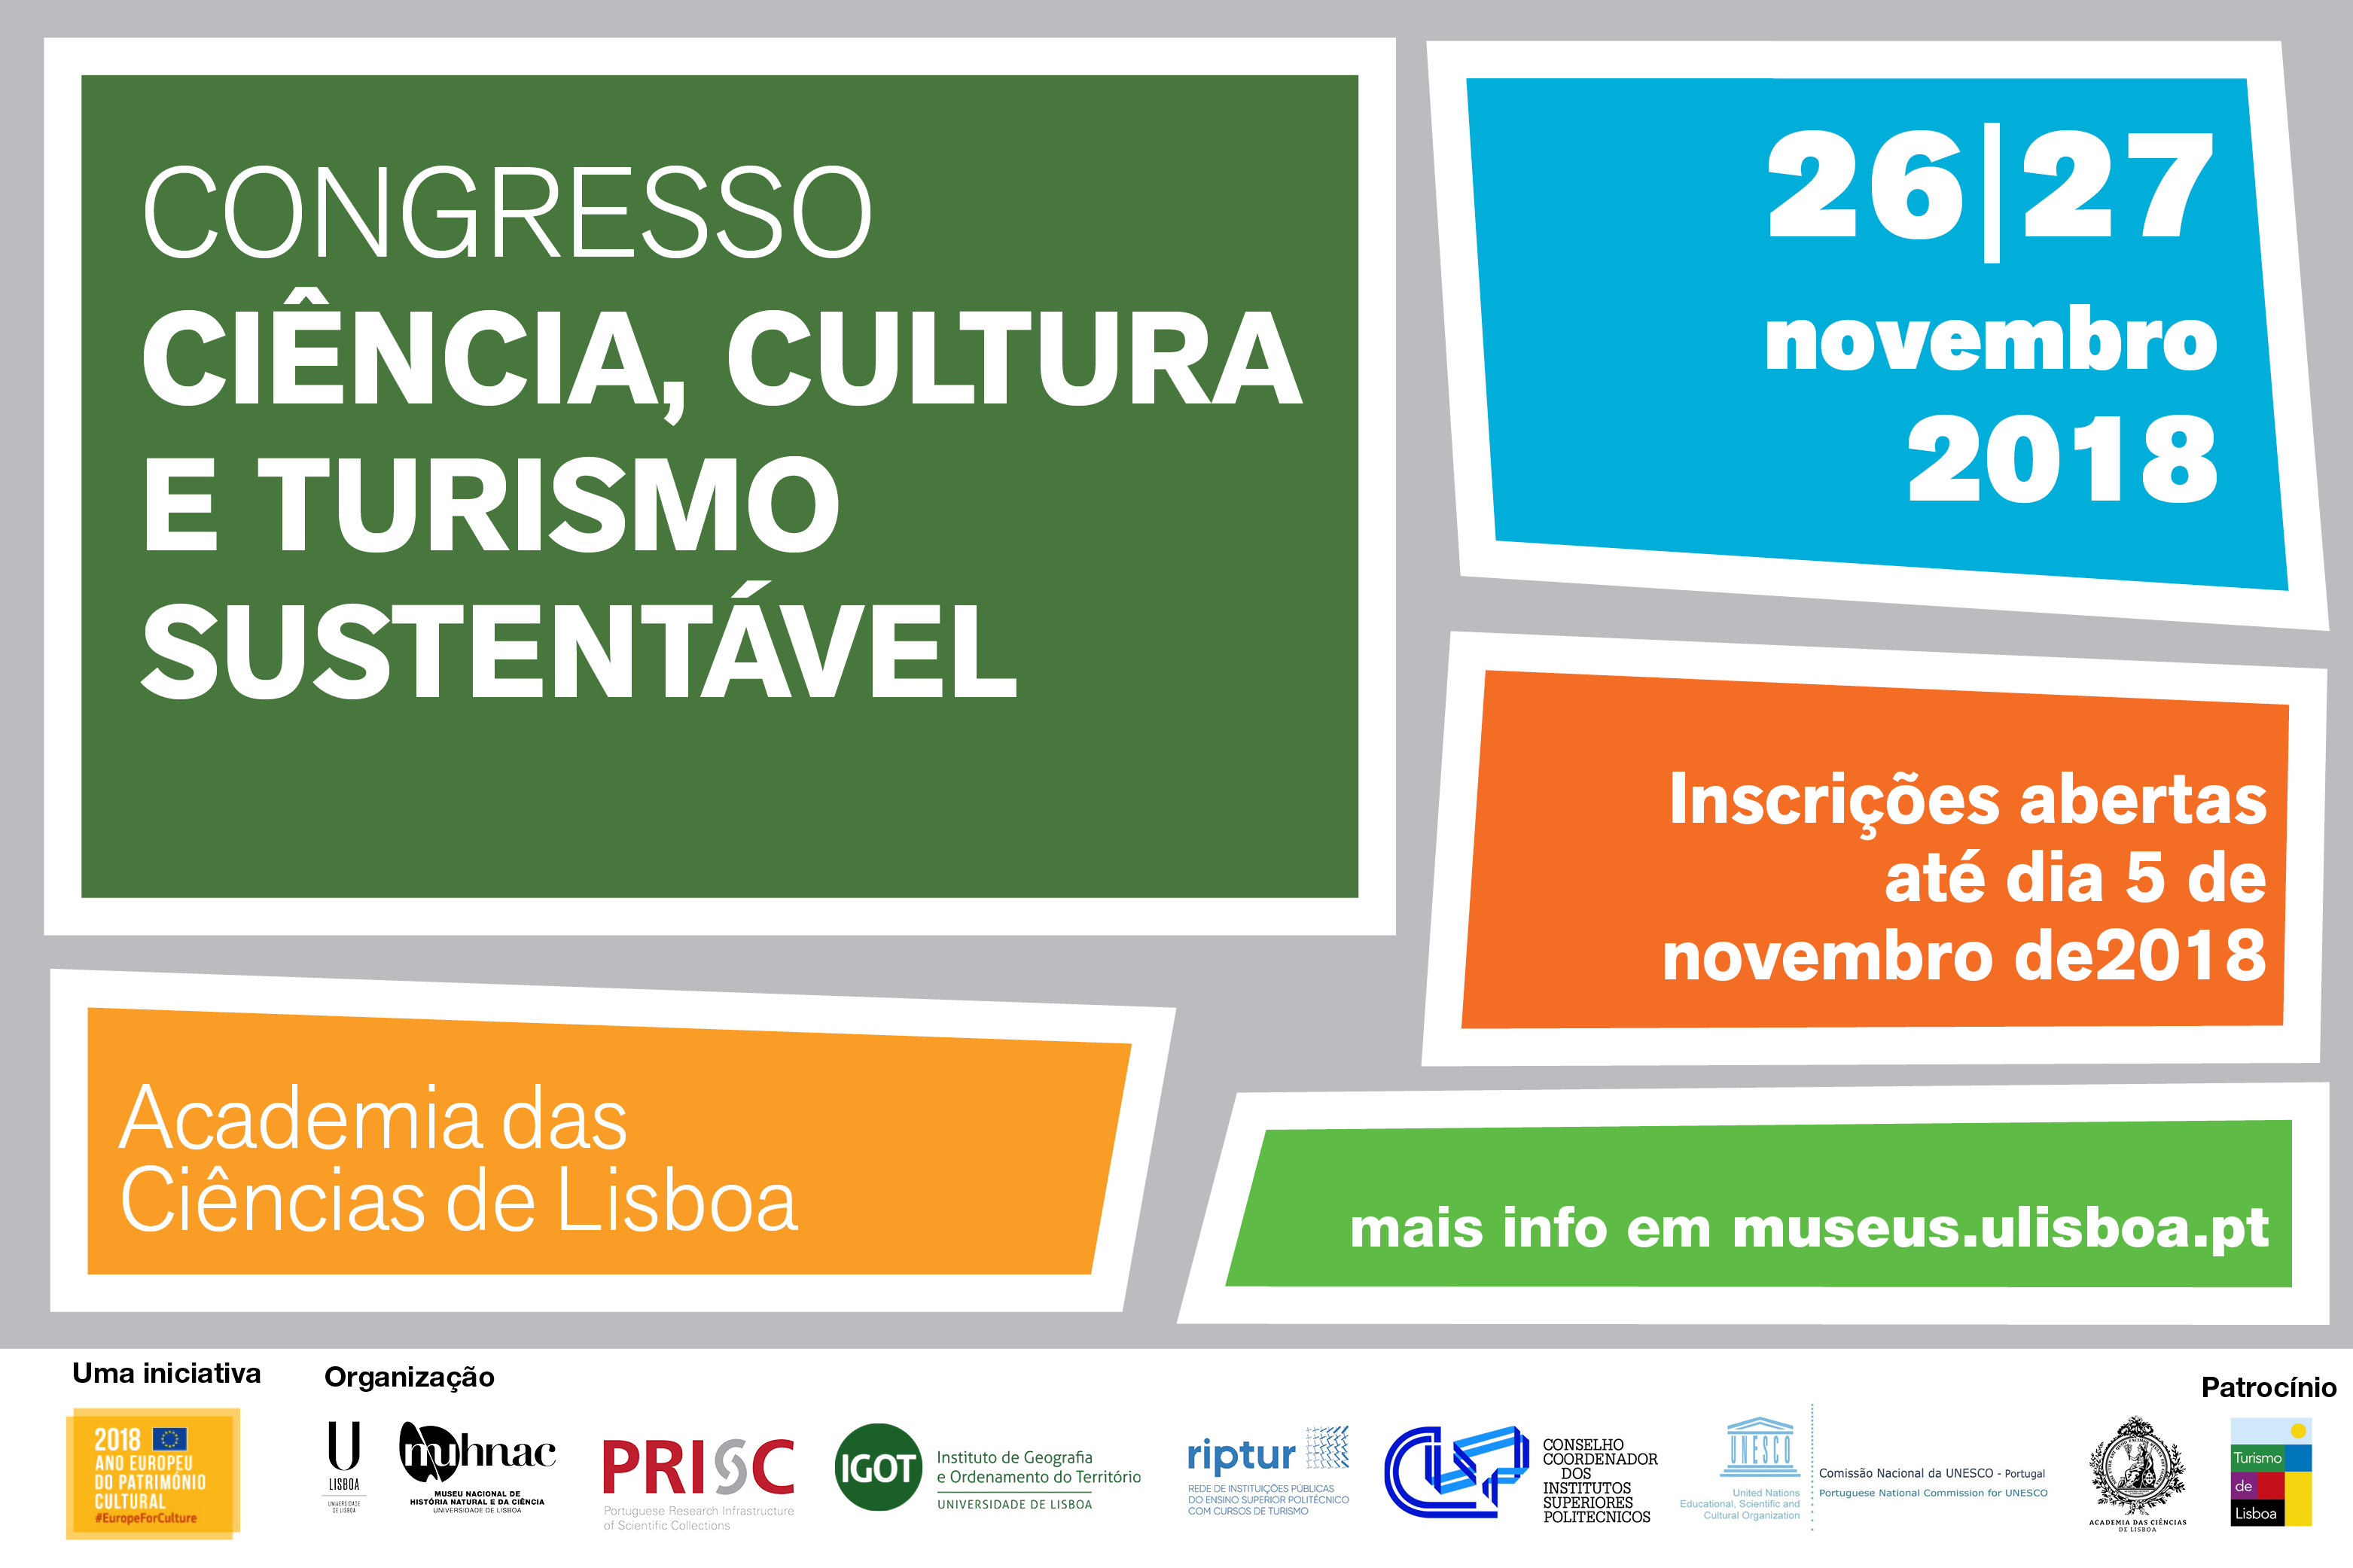 Congress "Cience, Culture and Sustainable Tourism"